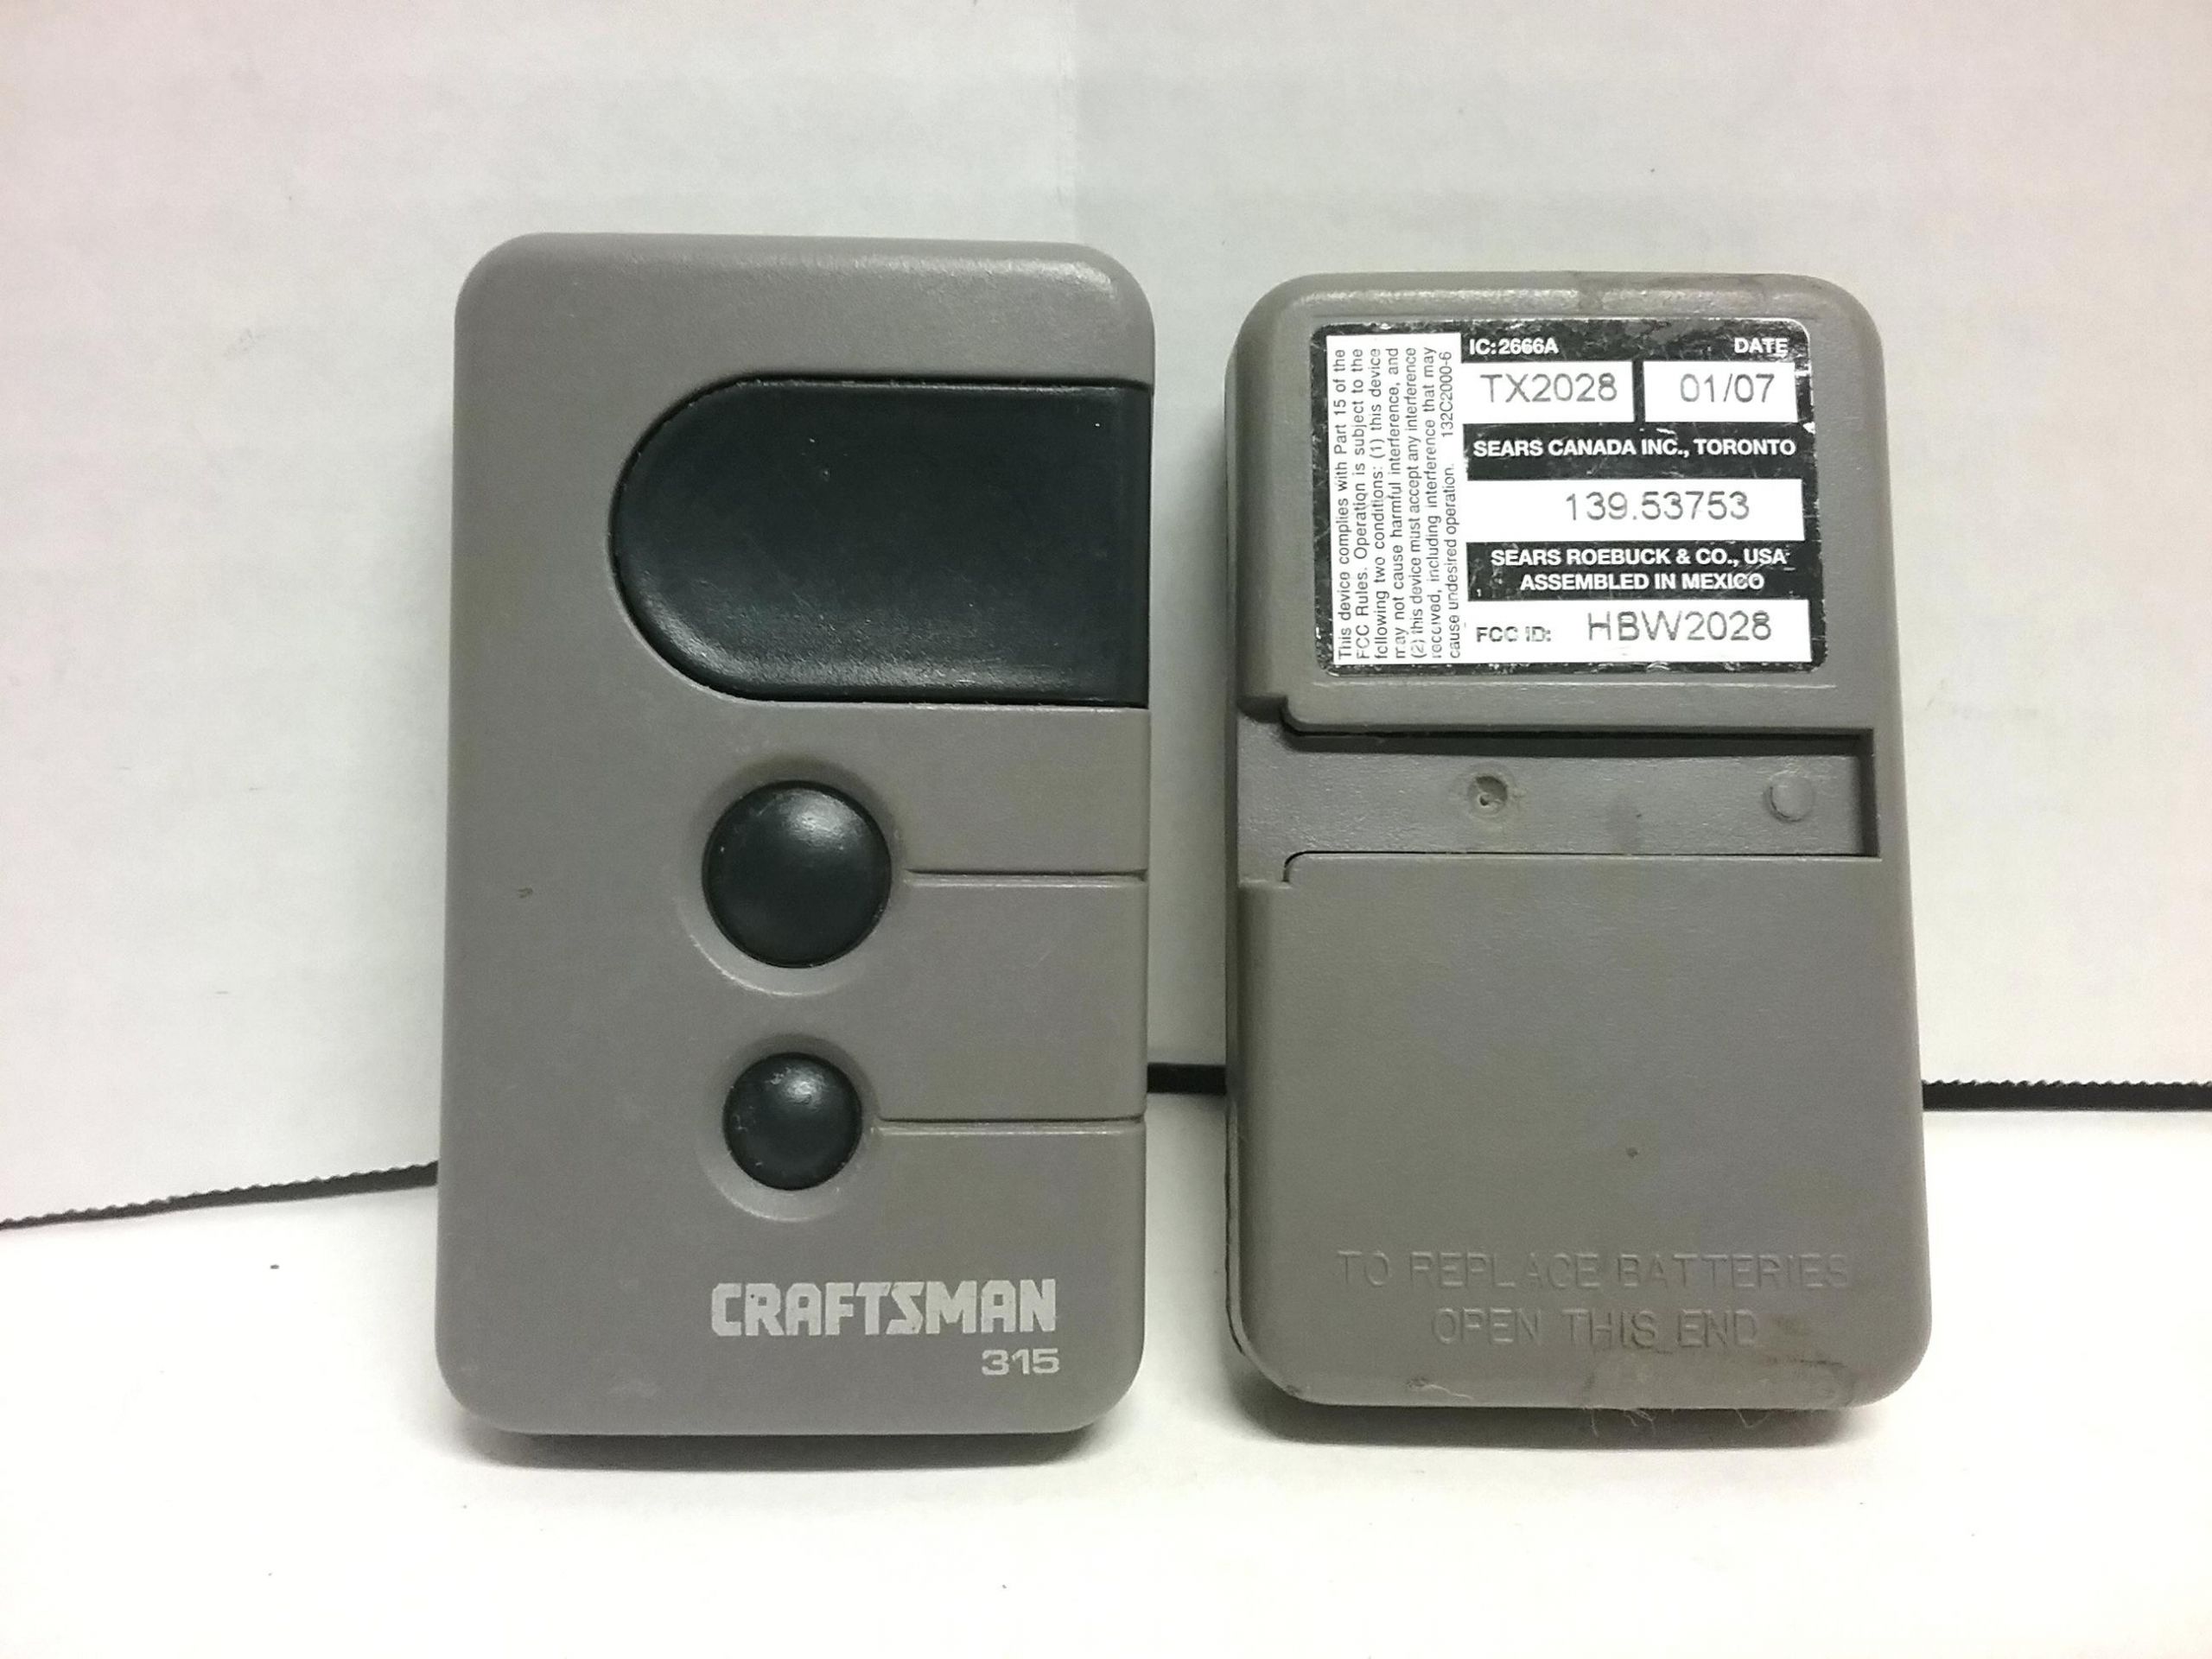 Craftsman 315 Garage Door Opener
 The Most Stylish and also Stunning Battery For Craftsman